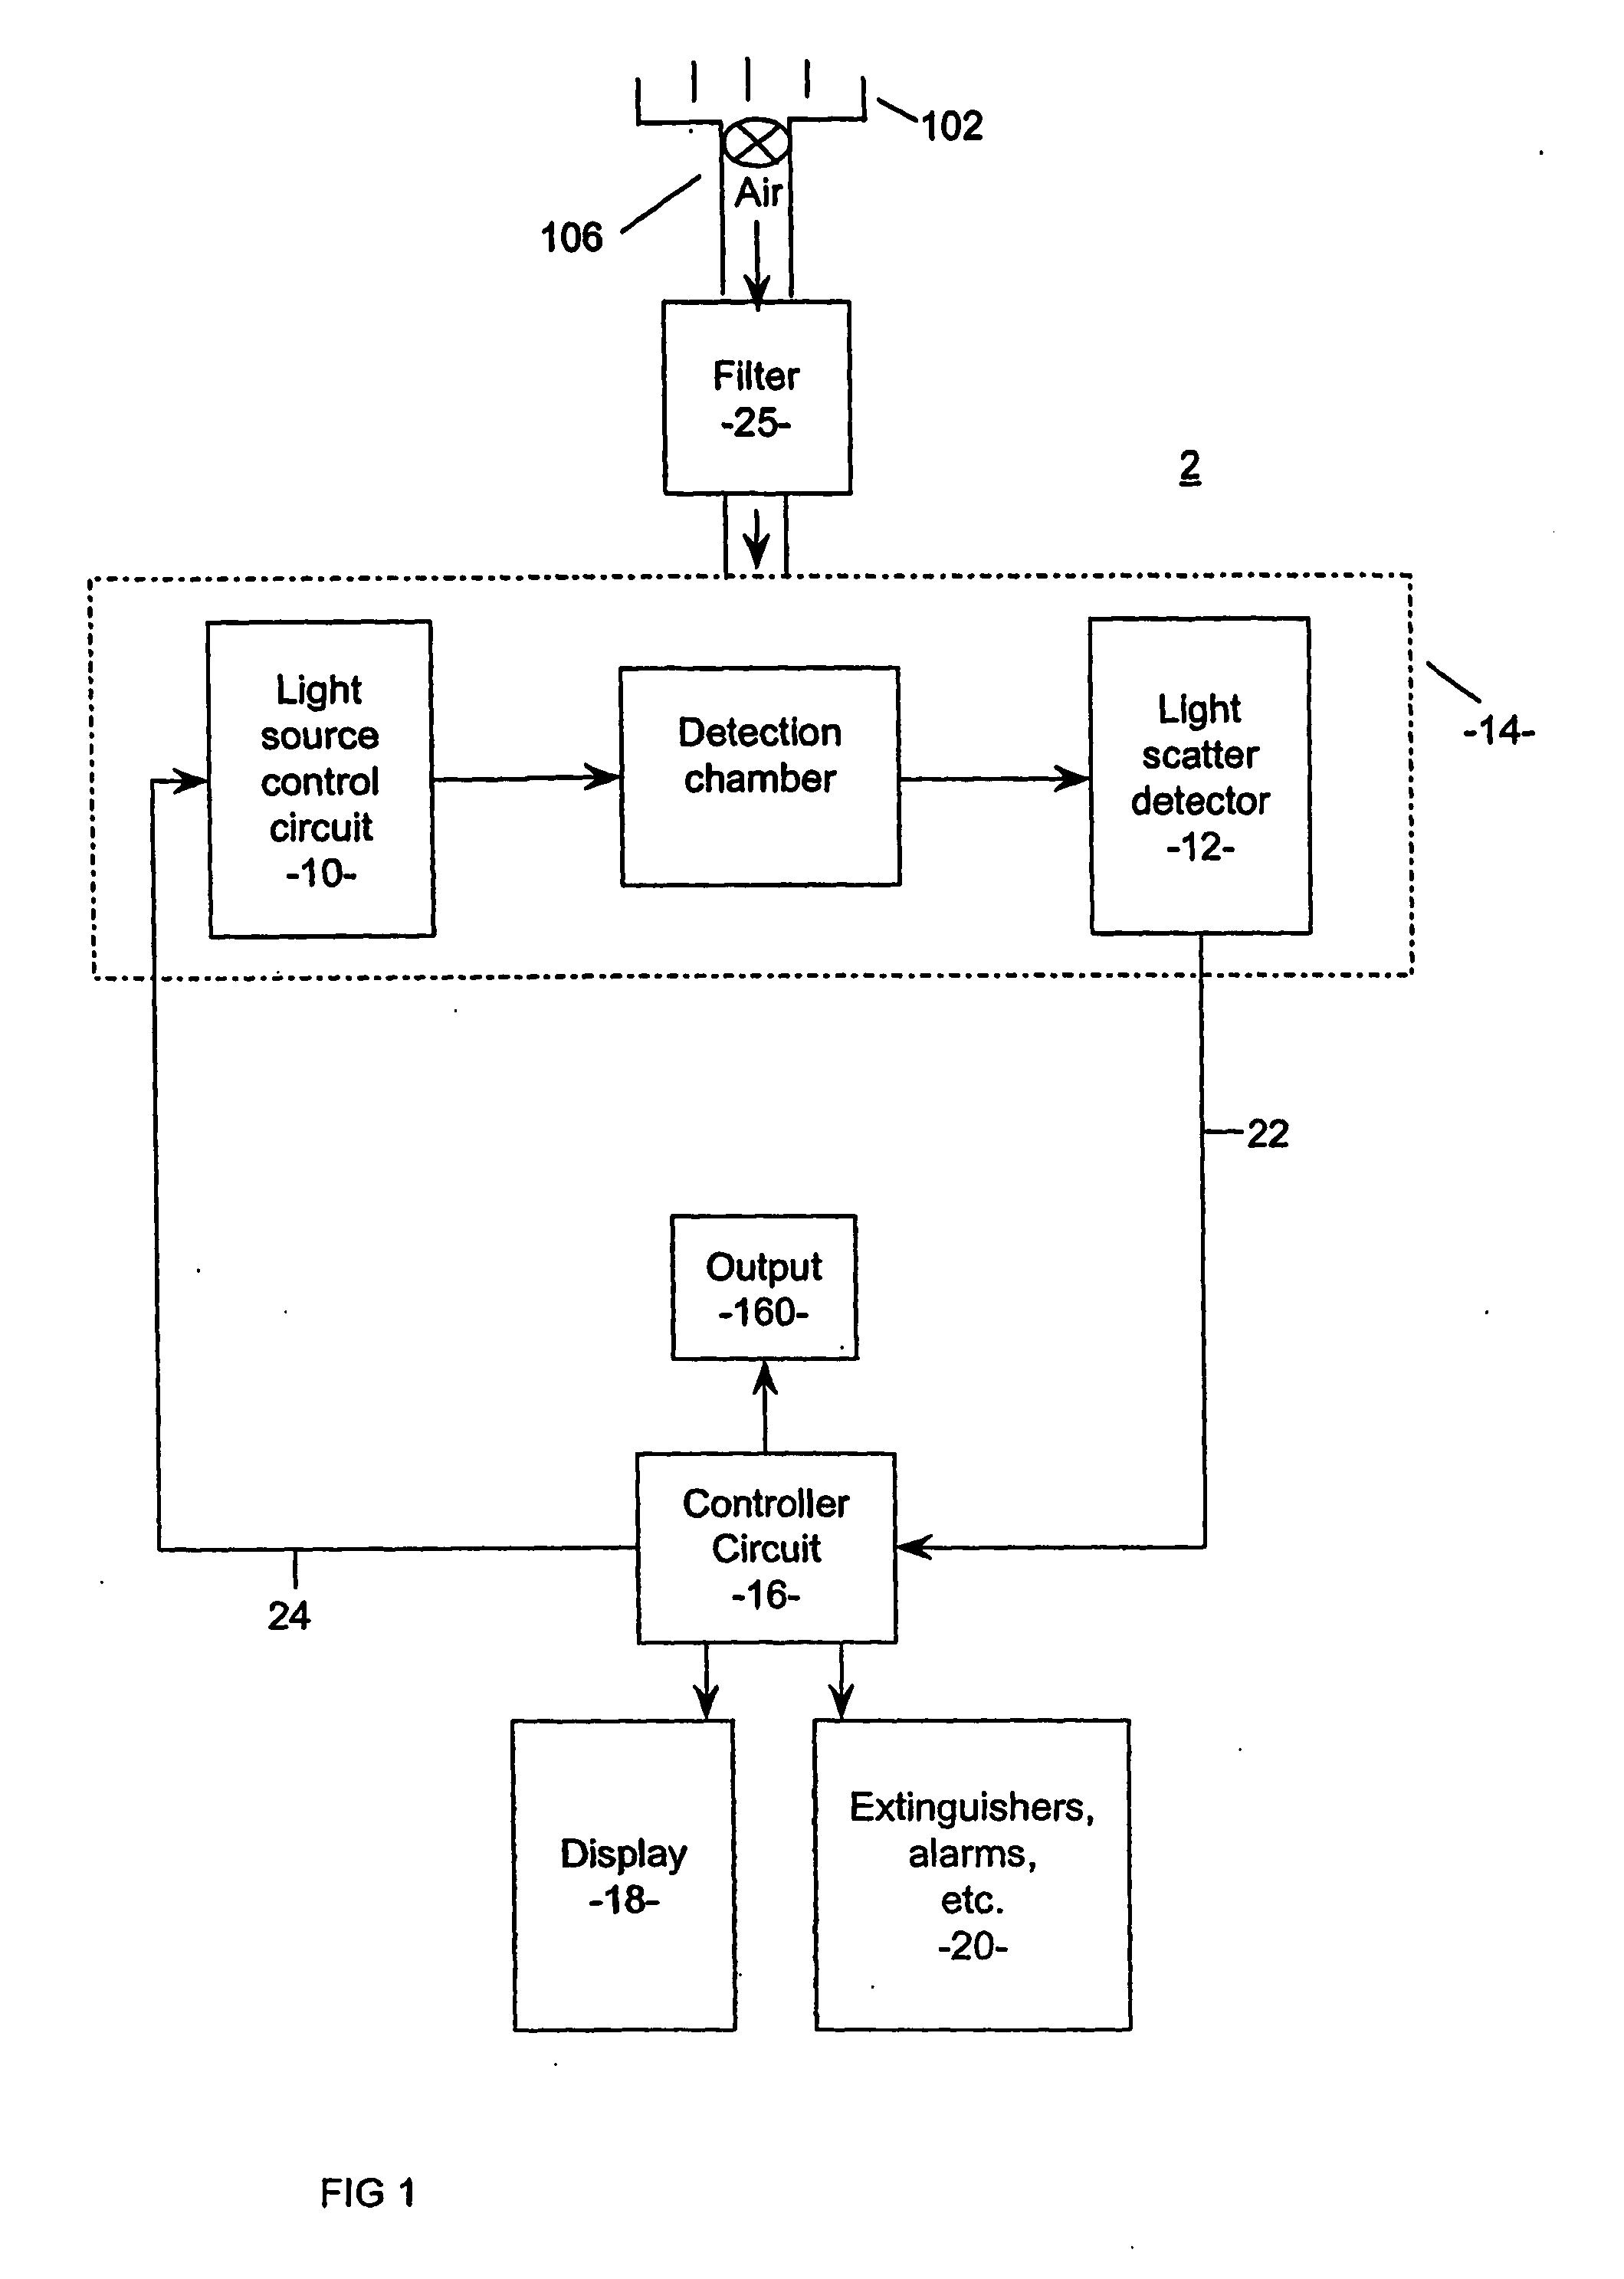 Method and system for a filter